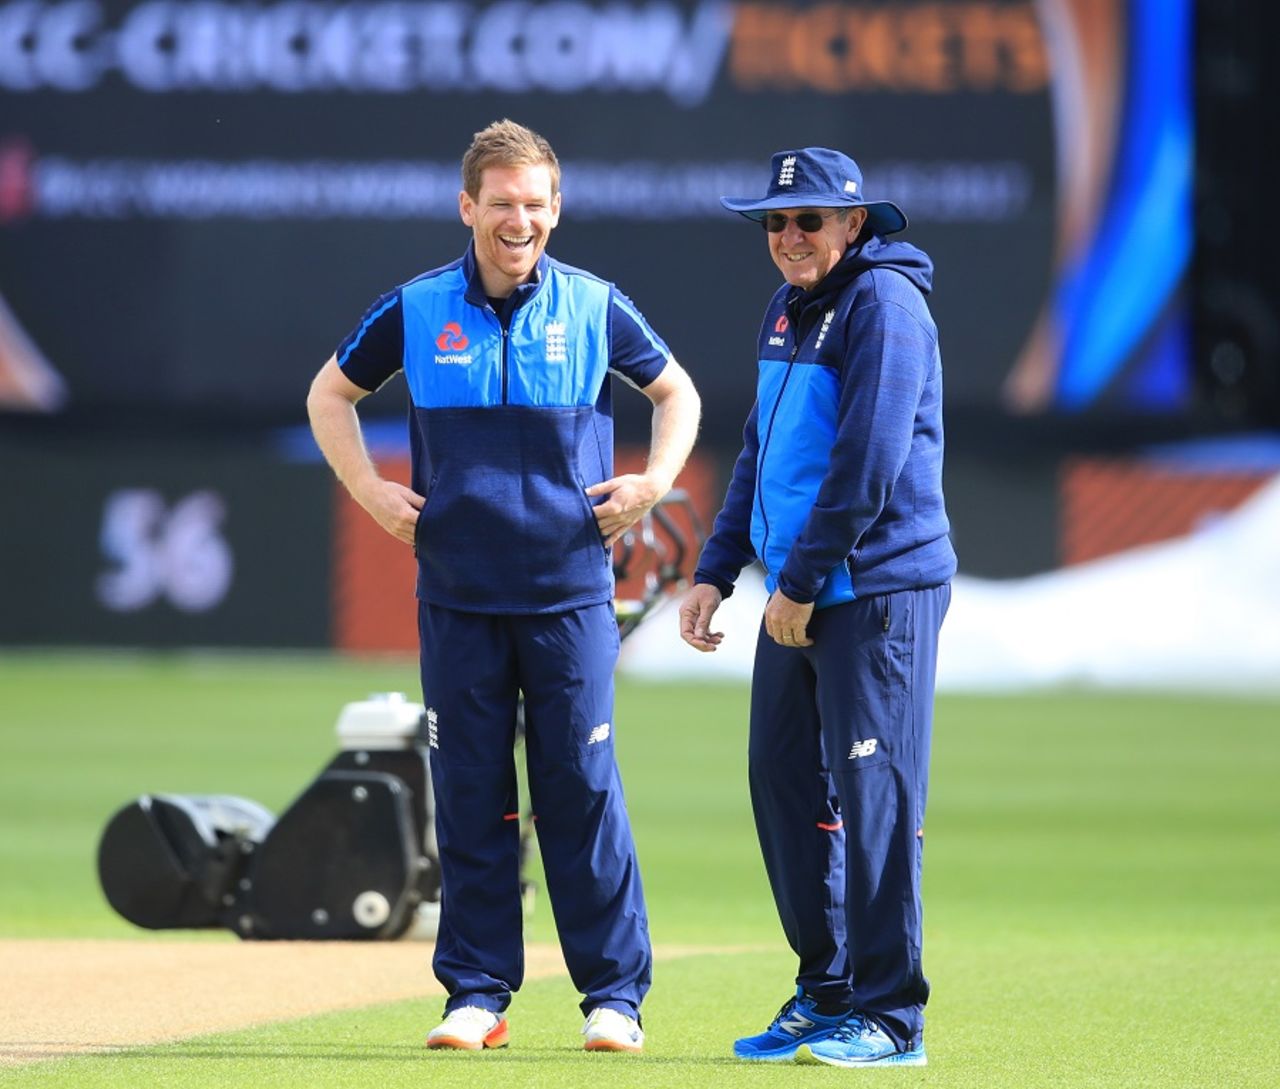 Eoin Morgan and Trevor Bayliss share a lighter moment, Edgbaston, Champions Trophy 2017, June 9, 2017